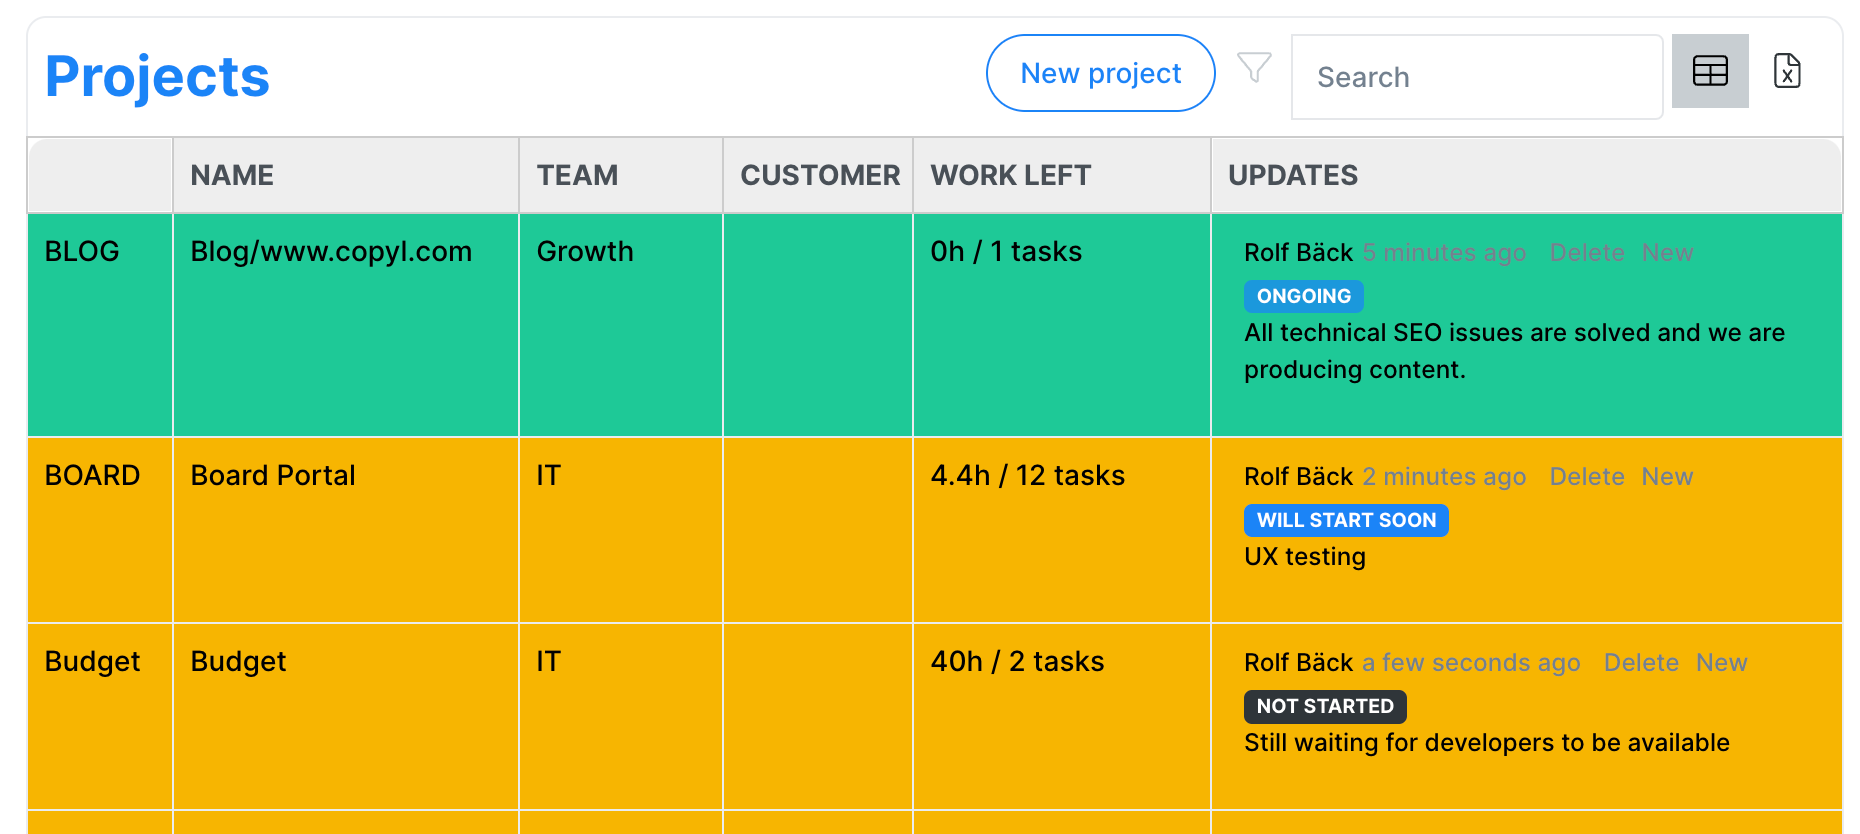 Project list that displays latest status update of each project